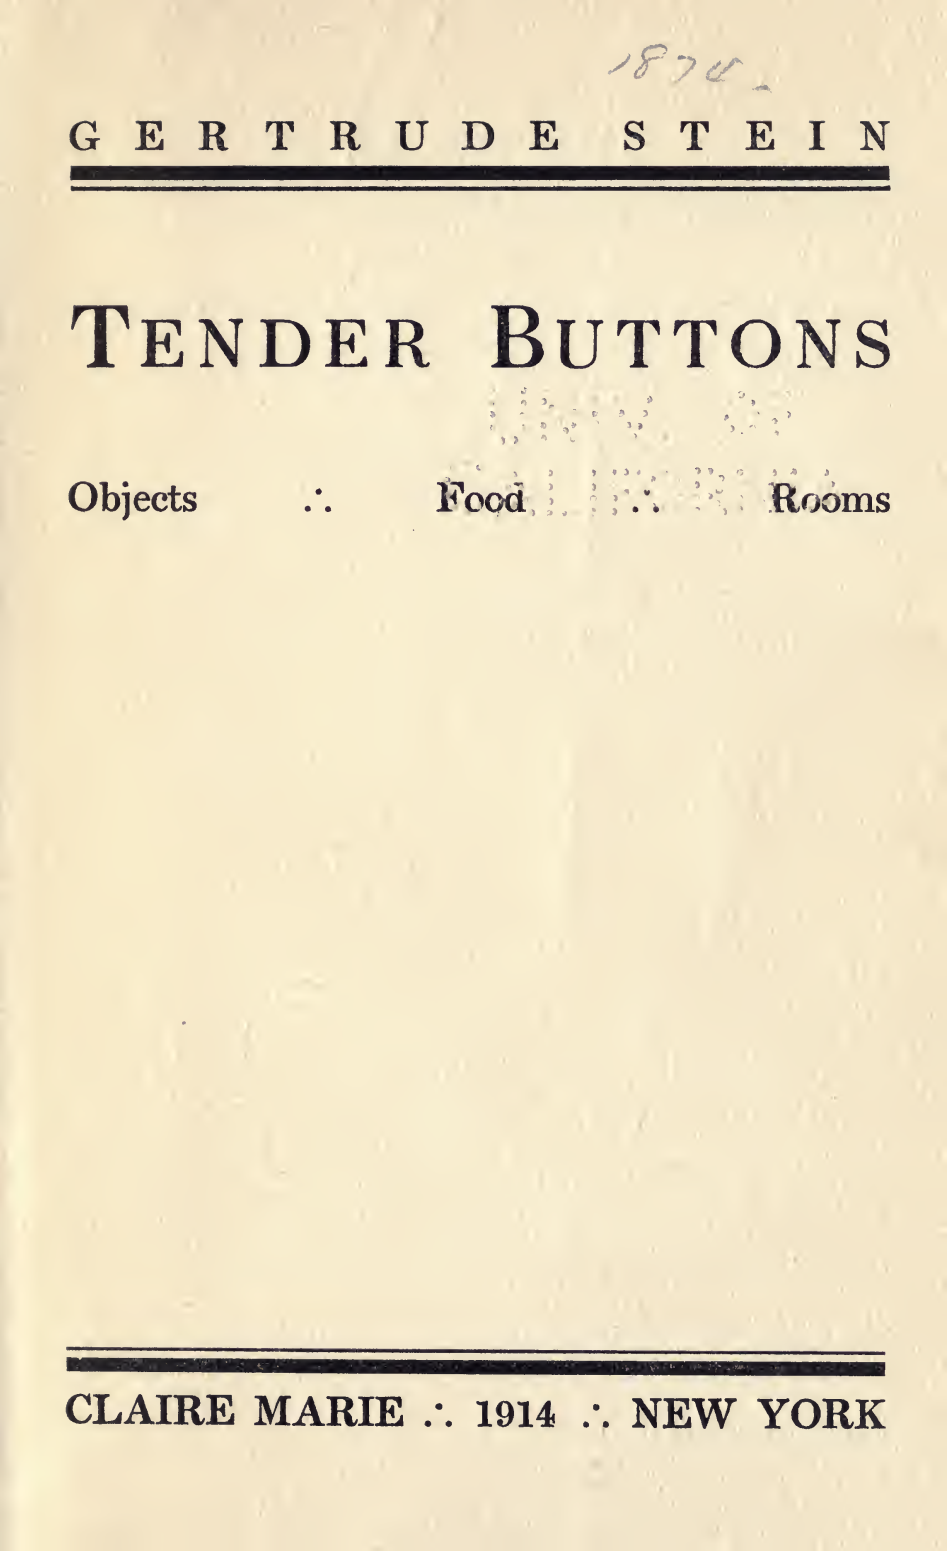 Title page of Gertrude Stein's prose poetry book Tender Buttons